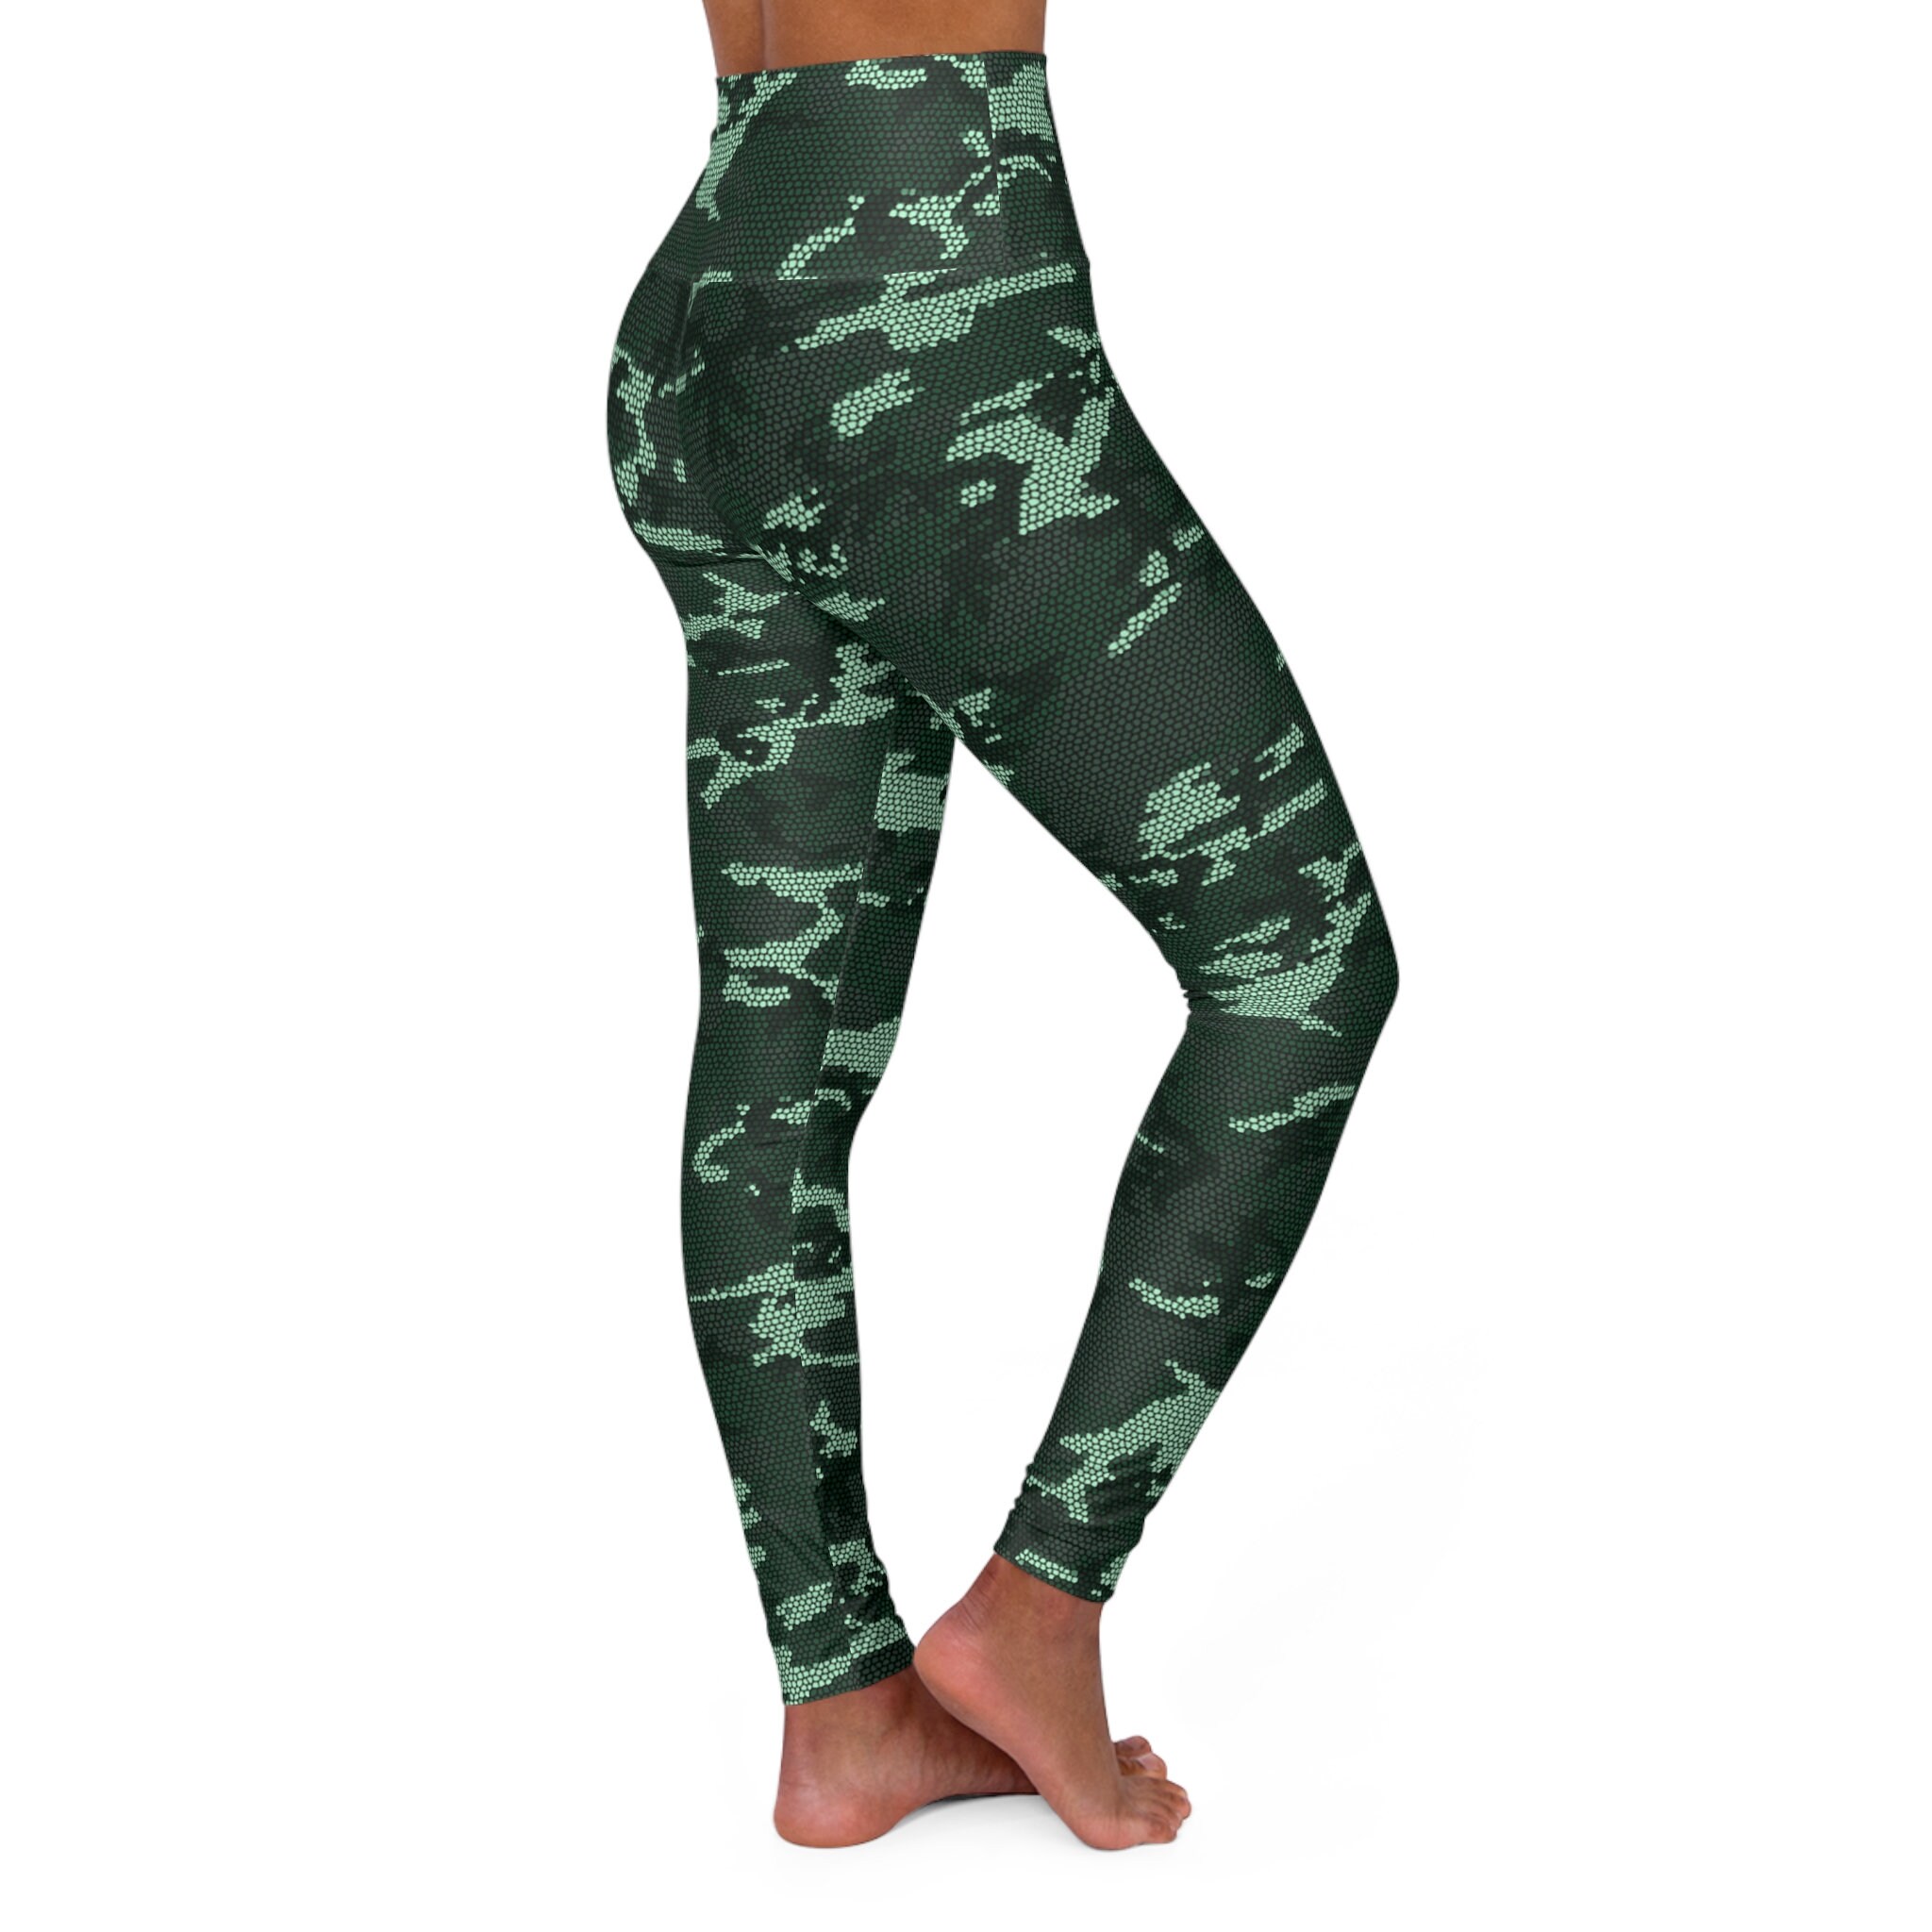 Women's Hunting Leggings Camouflage Leggings Outfit, Camo Printed